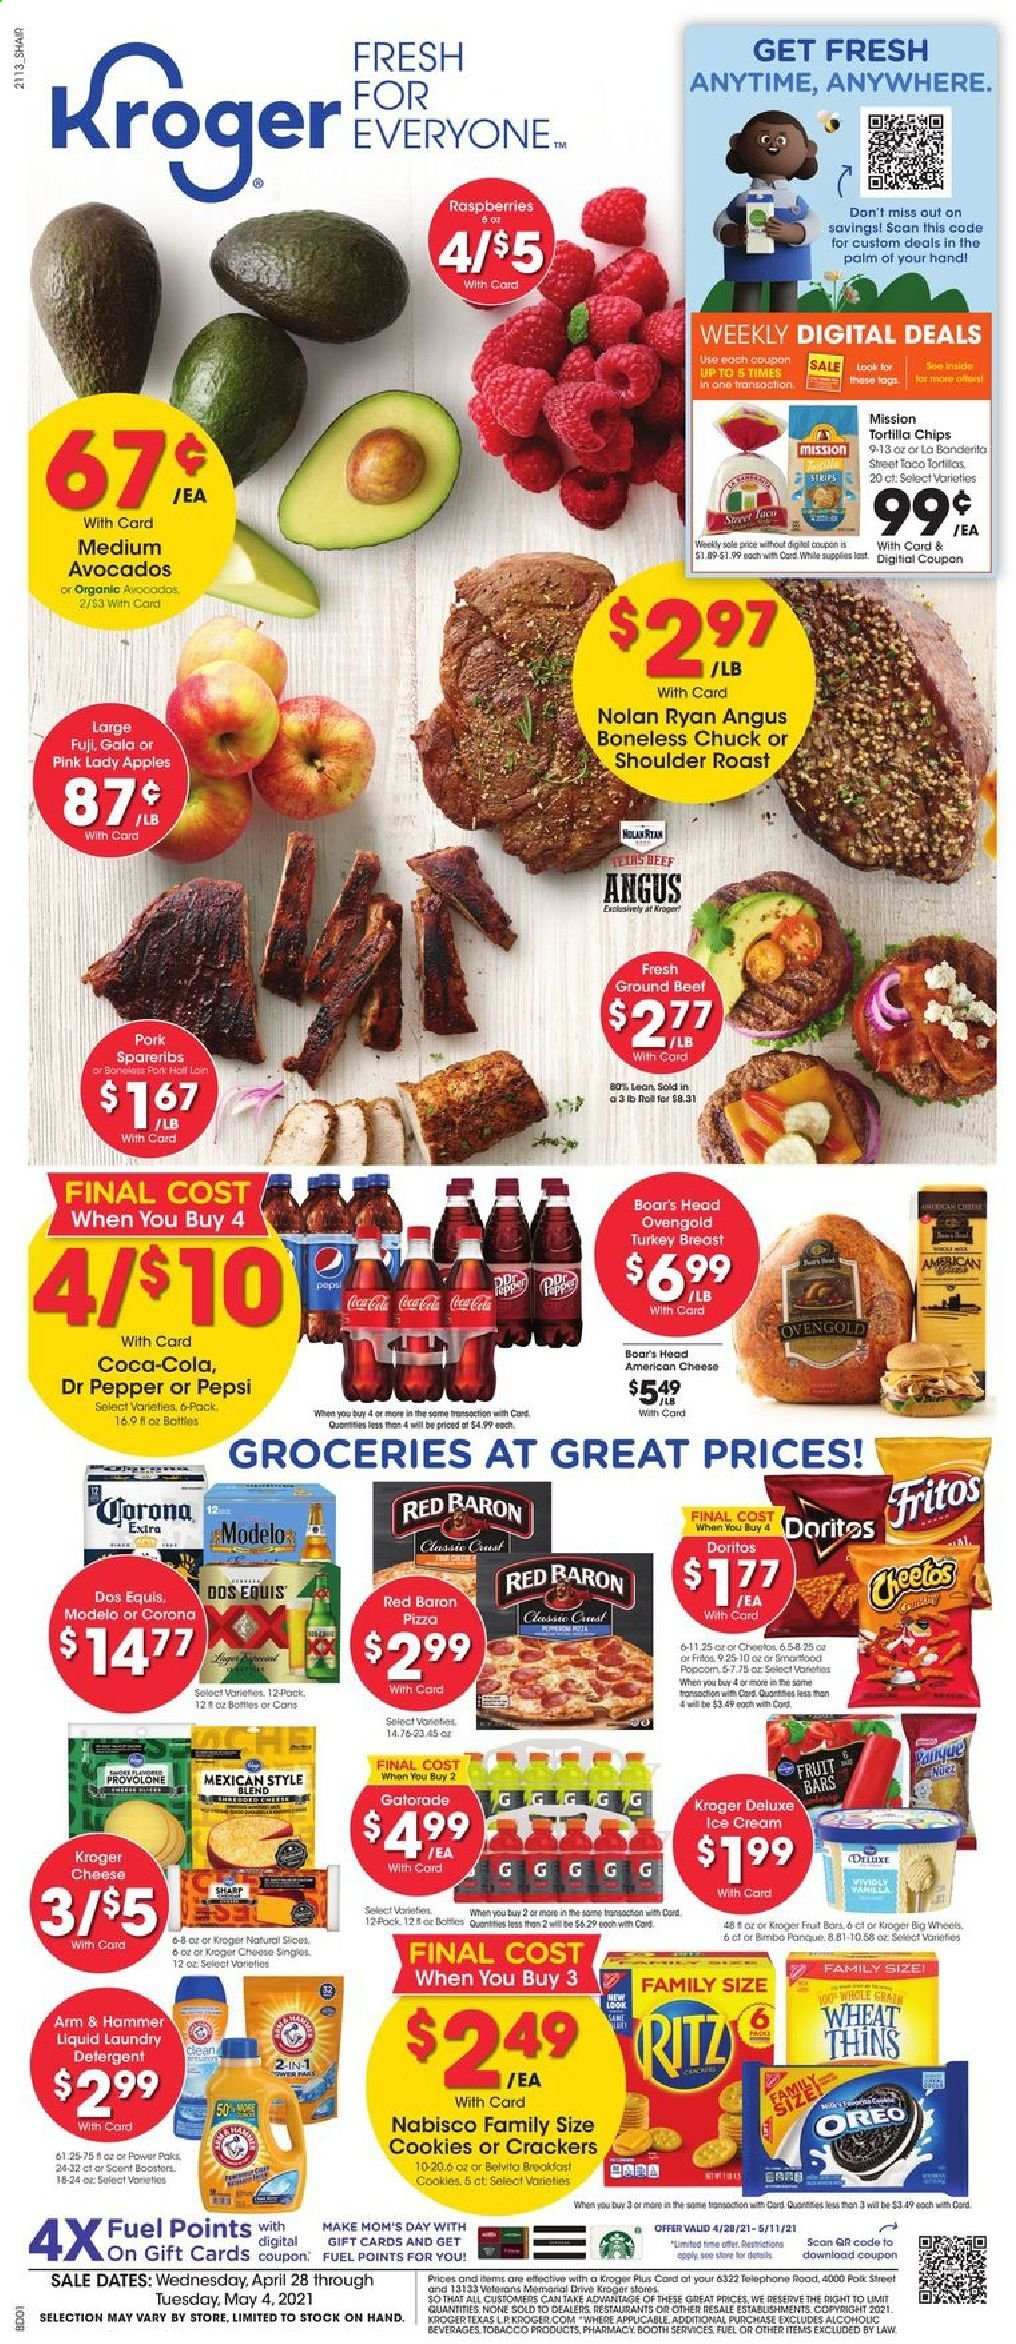 thumbnail - Kroger Flyer - 04/28/2021 - 05/04/2021 - Sales products - apples, avocado, Gala, raspberries, Pink Lady, pizza, american cheese, Oreo, ice cream, Red Baron, cookies, crackers, RITZ, Doritos, Fritos, tortilla chips, Cheetos, chips, Thins, ARM & HAMMER, Coca-Cola, Pepsi, Dr. Pepper, Gatorade, beer, Dos Equis, Corona Extra, Modelo, turkey breast, beef meat, ground beef, pork spare ribs, detergent, laundry detergent, scent booster. Page 1.